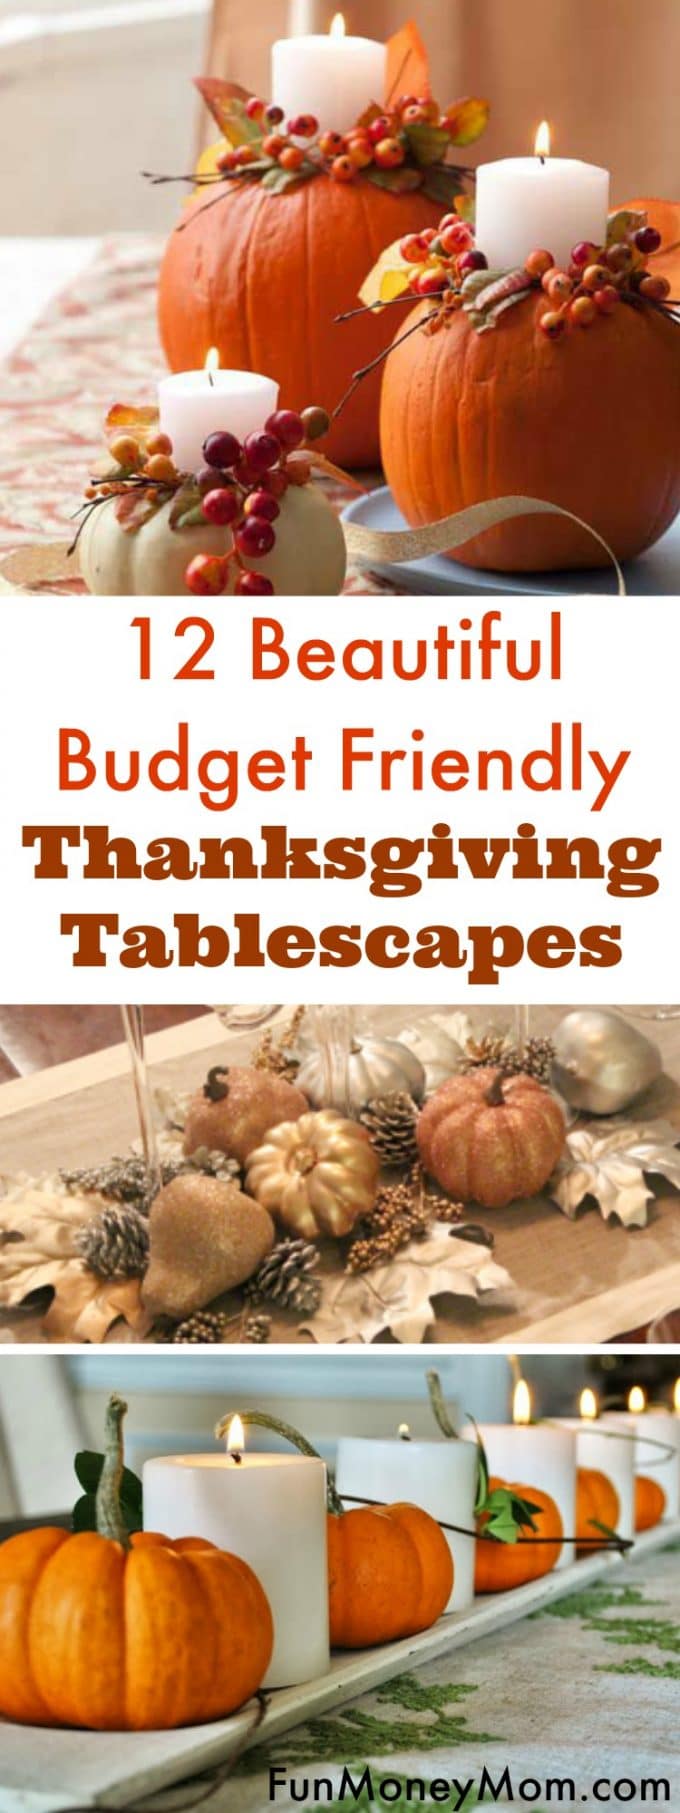 Looking for a beautiful yet budget friendly Thanksgiving Tablecape? These beautiful table settings are perfect for your holiday table